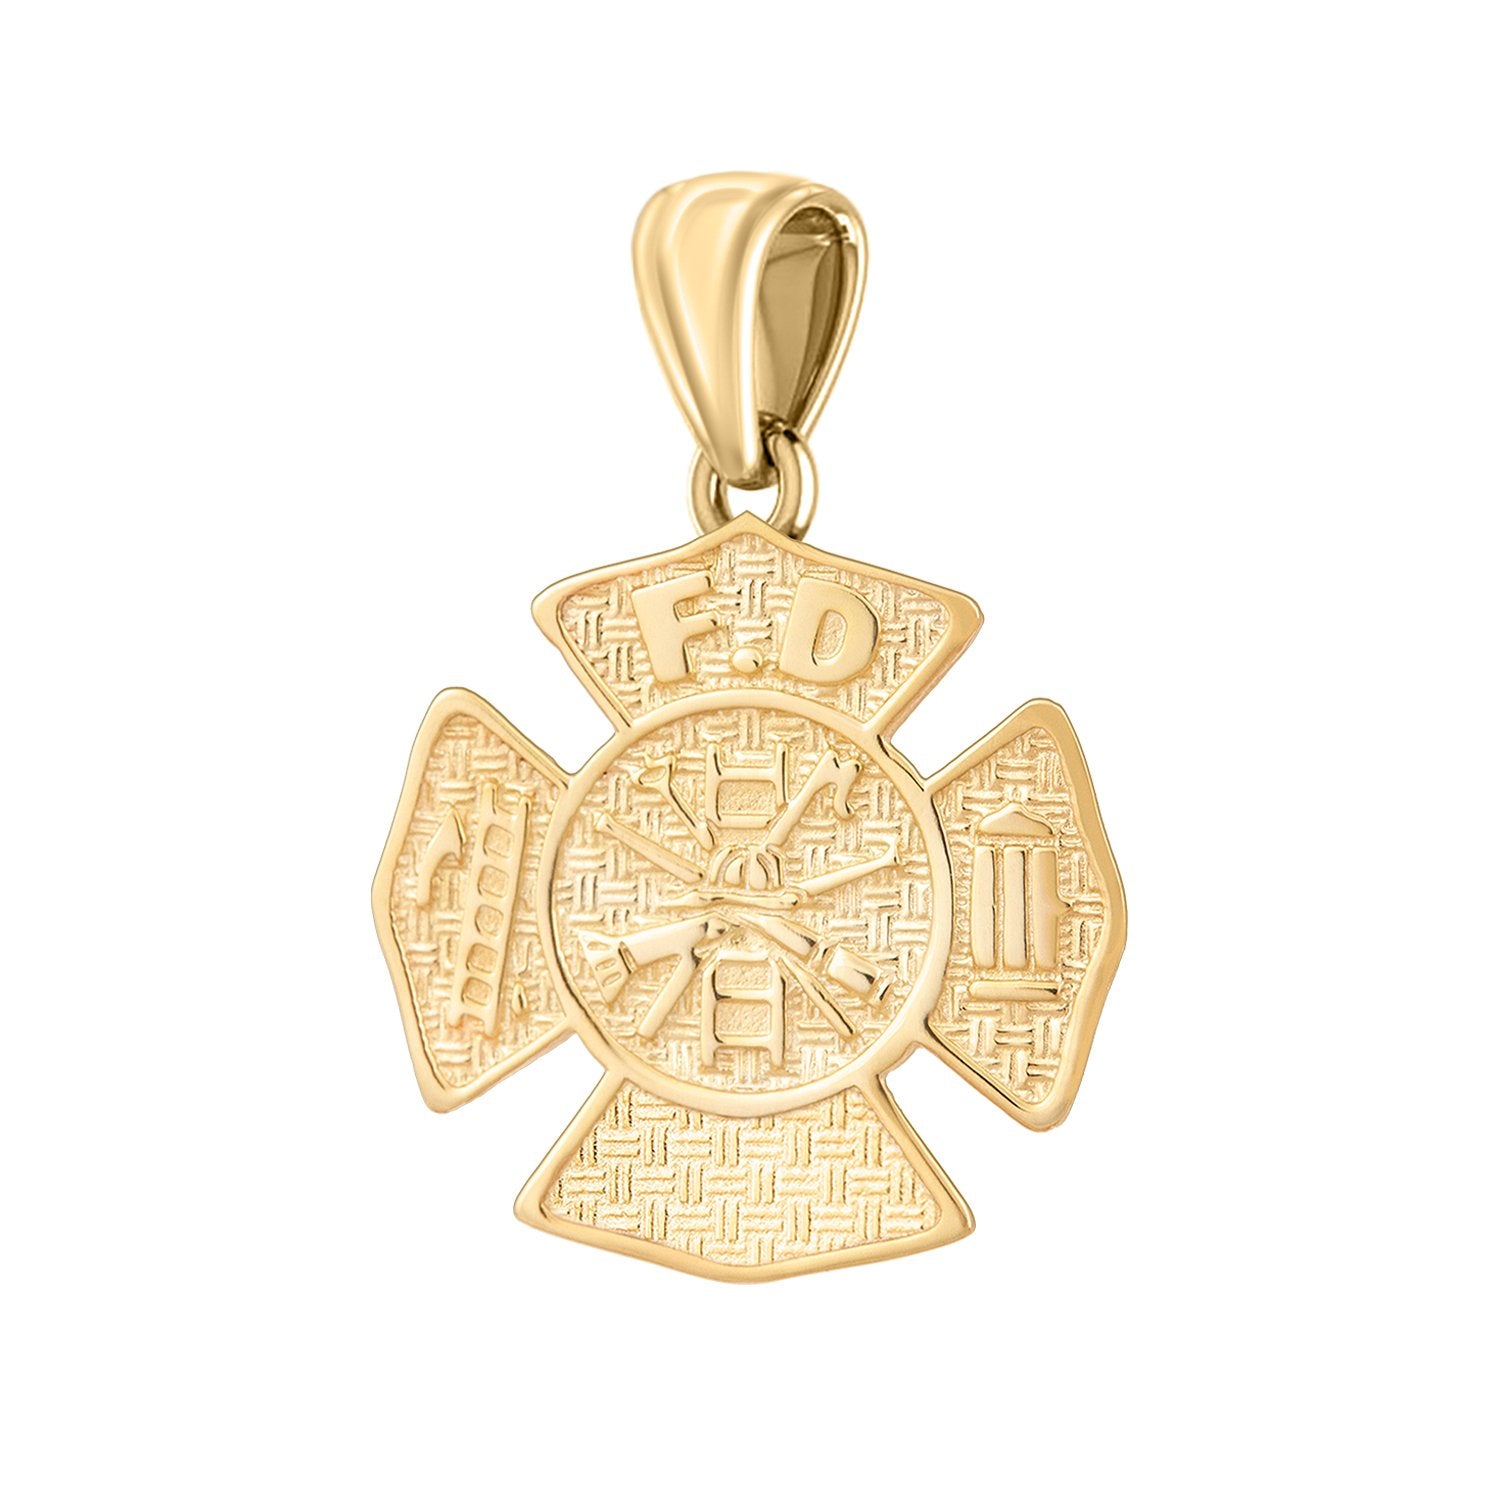 Firefighter Necklace of 26mm in 14k Gold - Pendant Only